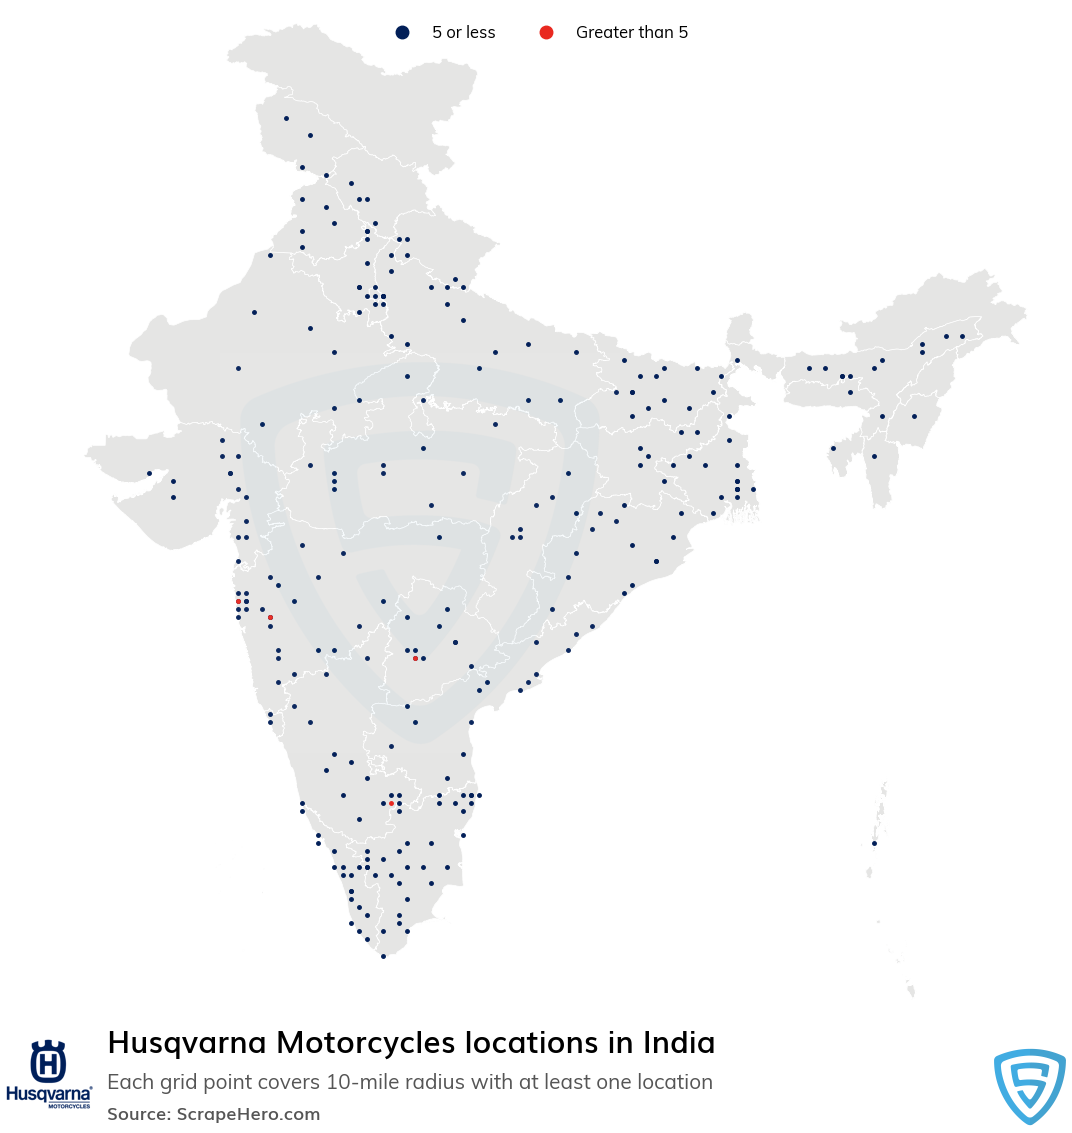 Map of Husqvarna Motorcycles locations in India in 2022